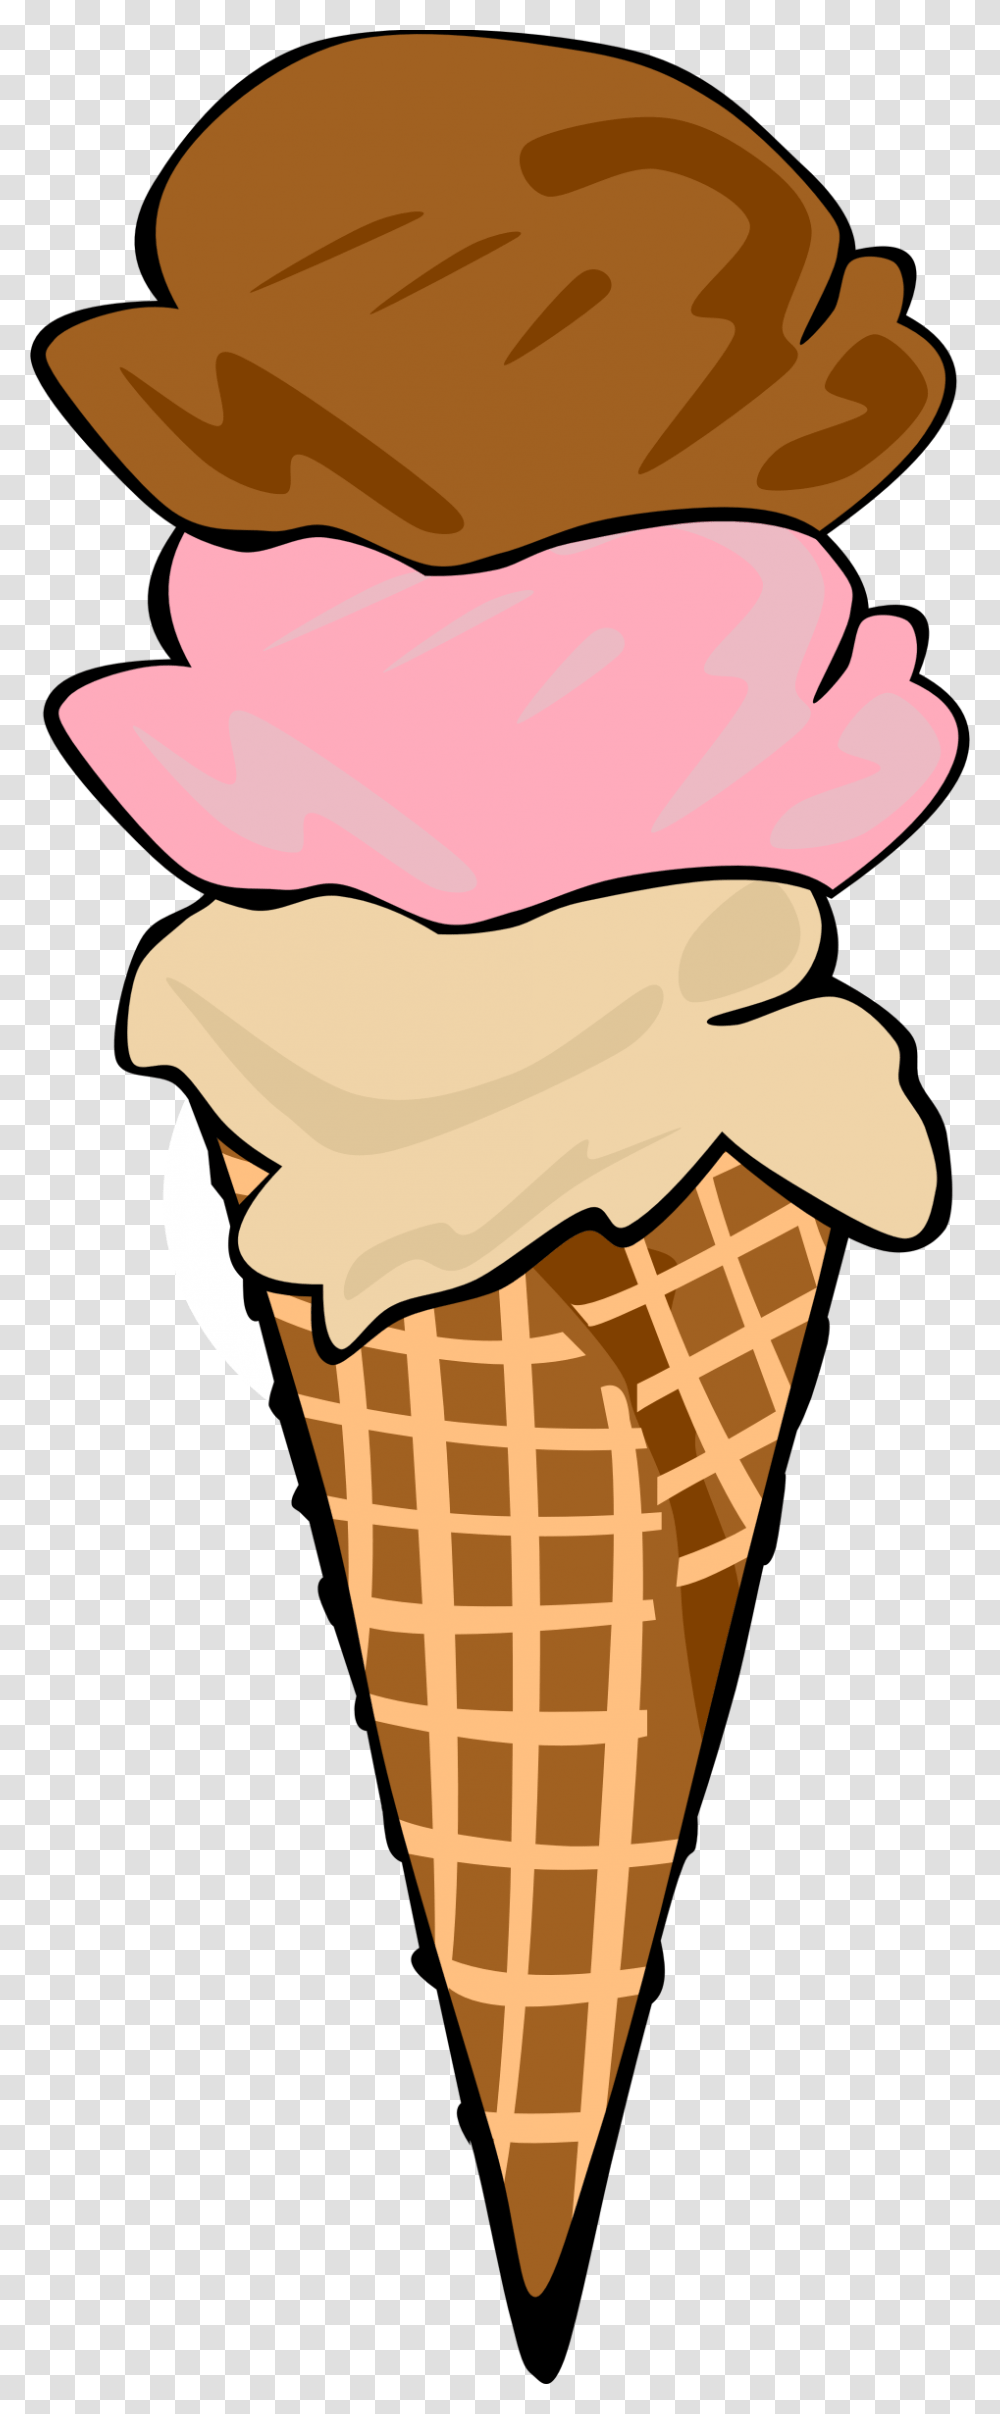 Ice Cream Cone With Sprinkles Clipart Ice Cream Cone Clip Art, Dessert, Food, Creme, Icing Transparent Png